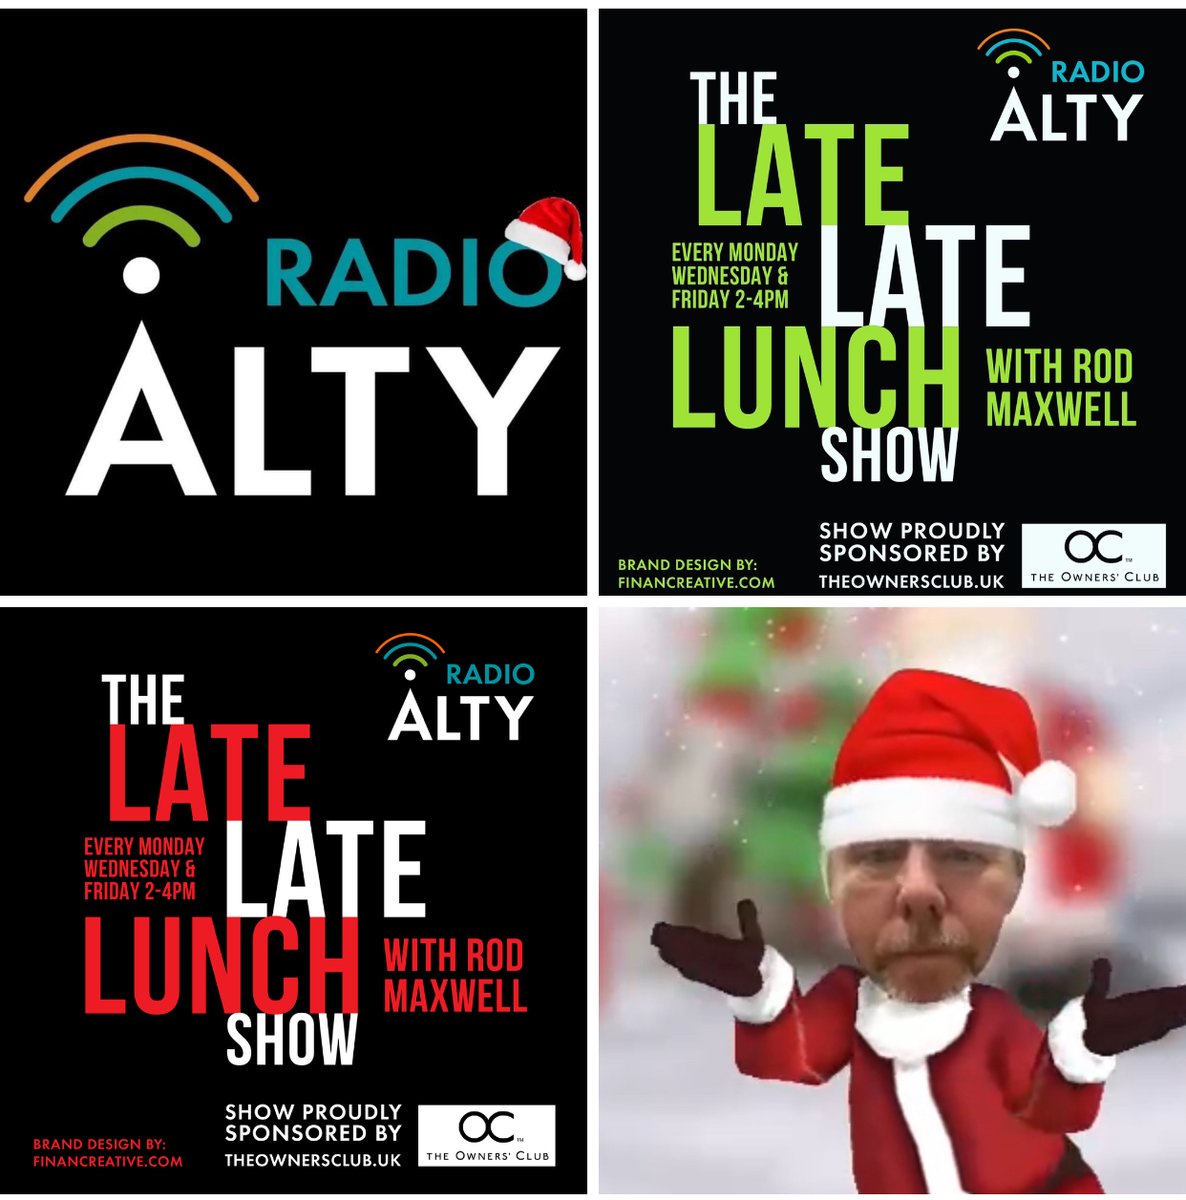 Festive favs on #theLateLateLunchshow today from 2pm. Call or text Rod on 07935537425 for any requests, shout outs or festive craic! RadioAlty.co.uk - listen online, apps, or Alexa. Supported by theOwnersclub.uk #Xmas #DrivingHome4Xmas